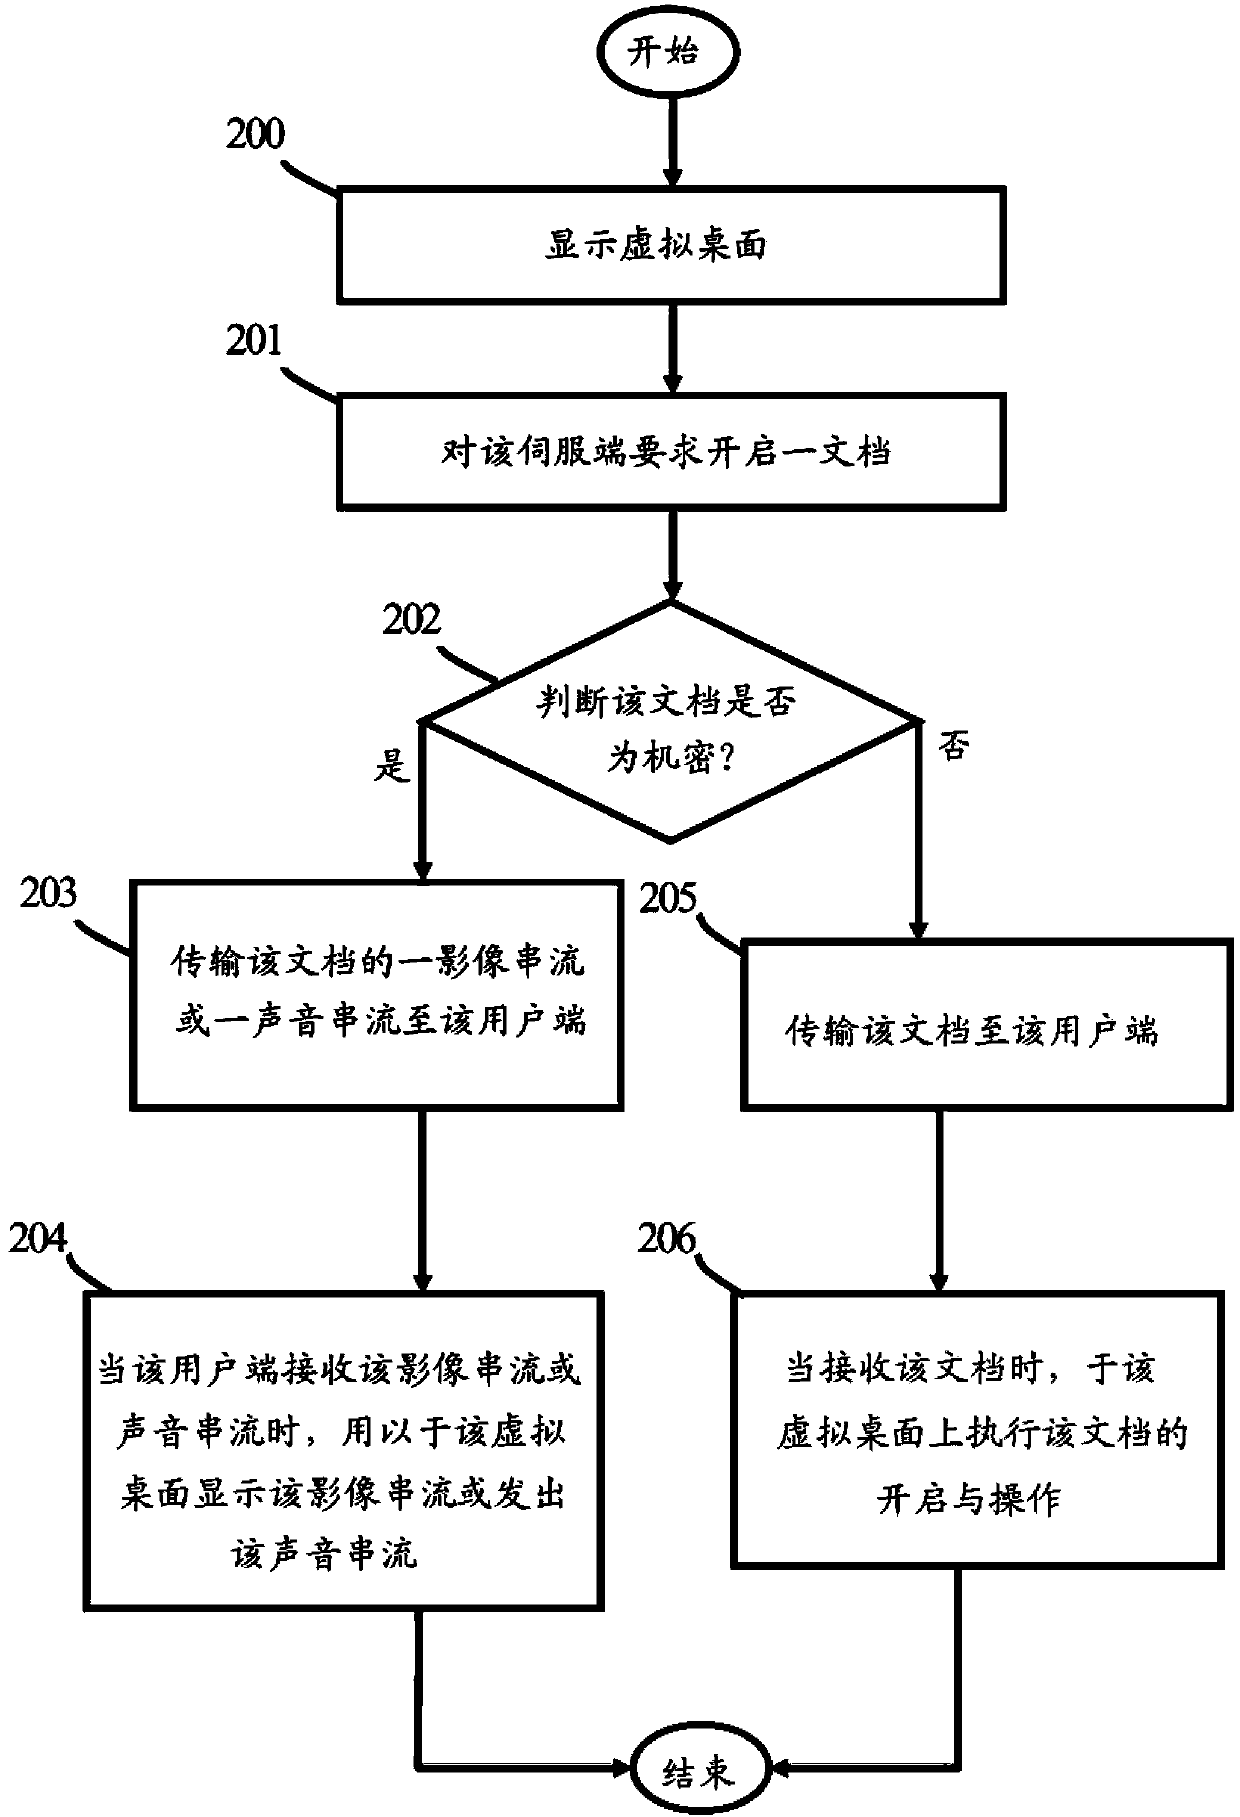 Virtual file transmission system and method of transmitting virtual file thereof